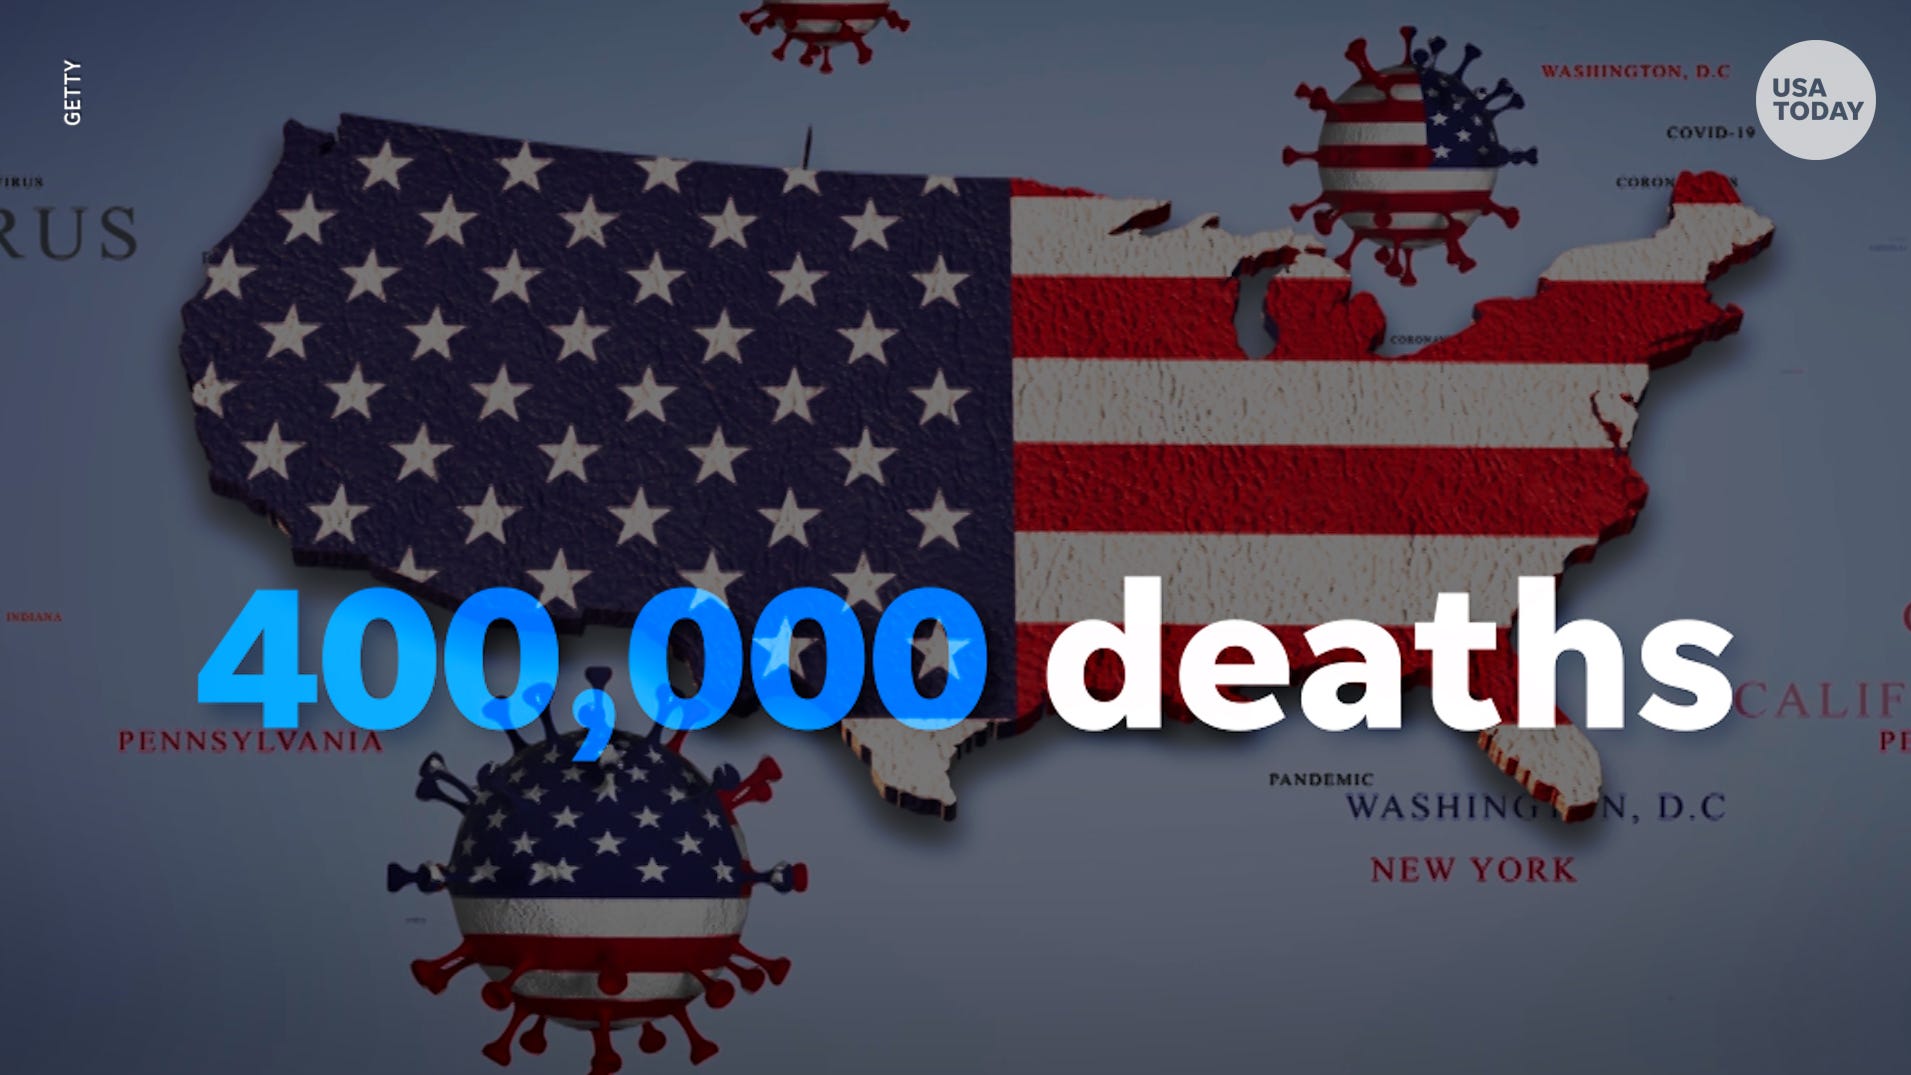 COVID deaths reaches 400,000 in US; experts blame Trump administration